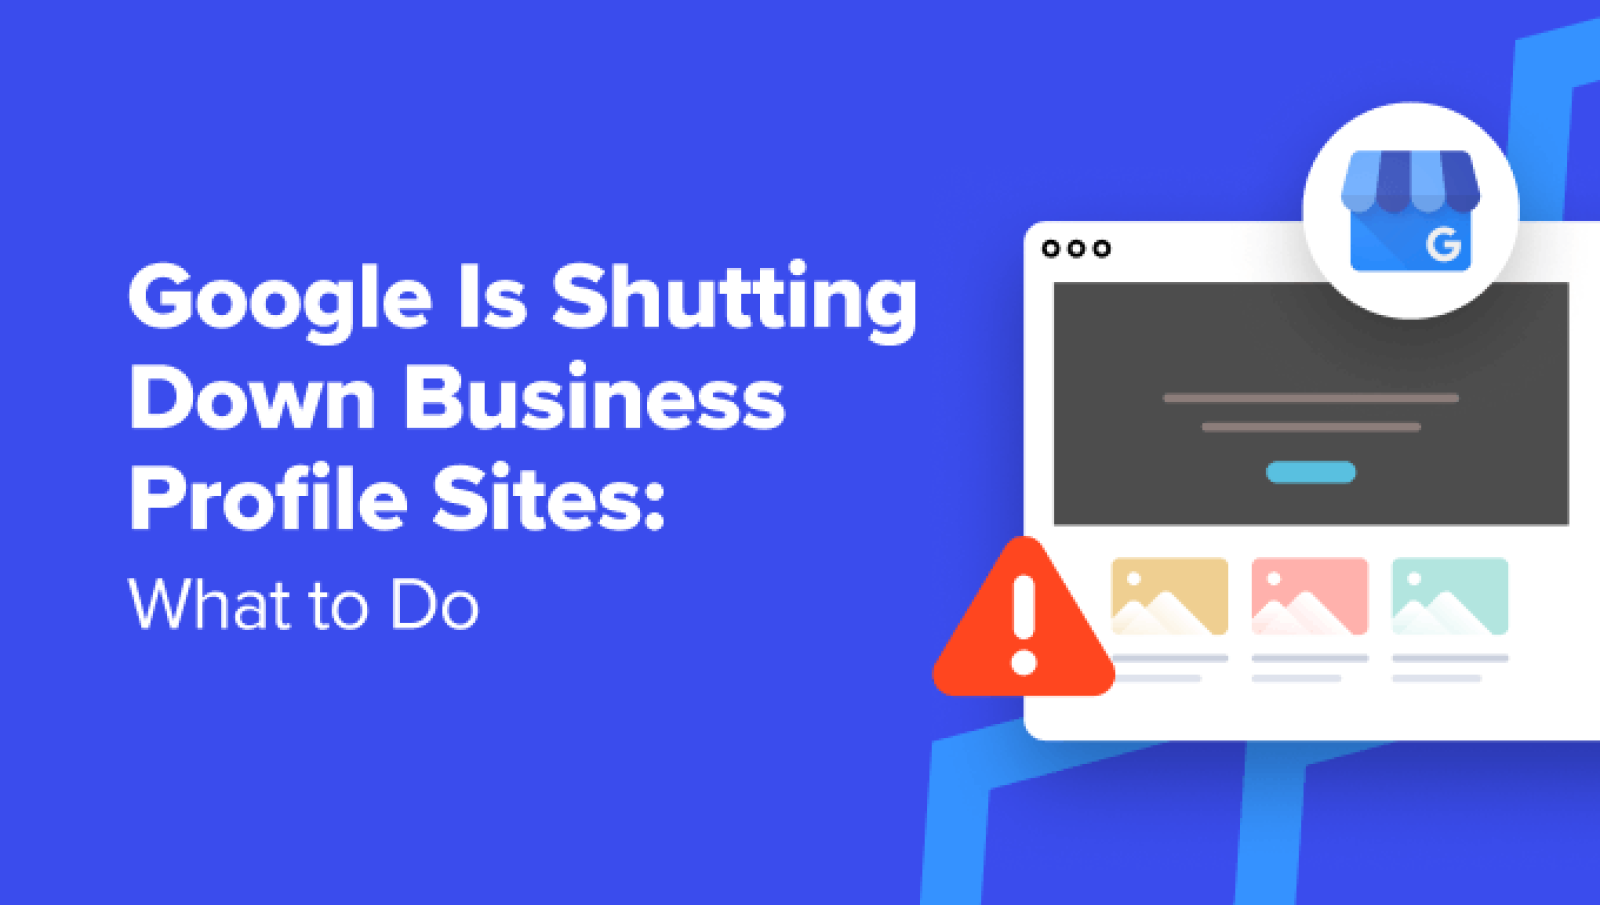 Google Is Shutting Down Enterprise Profile Websites: 5 Issues to Do